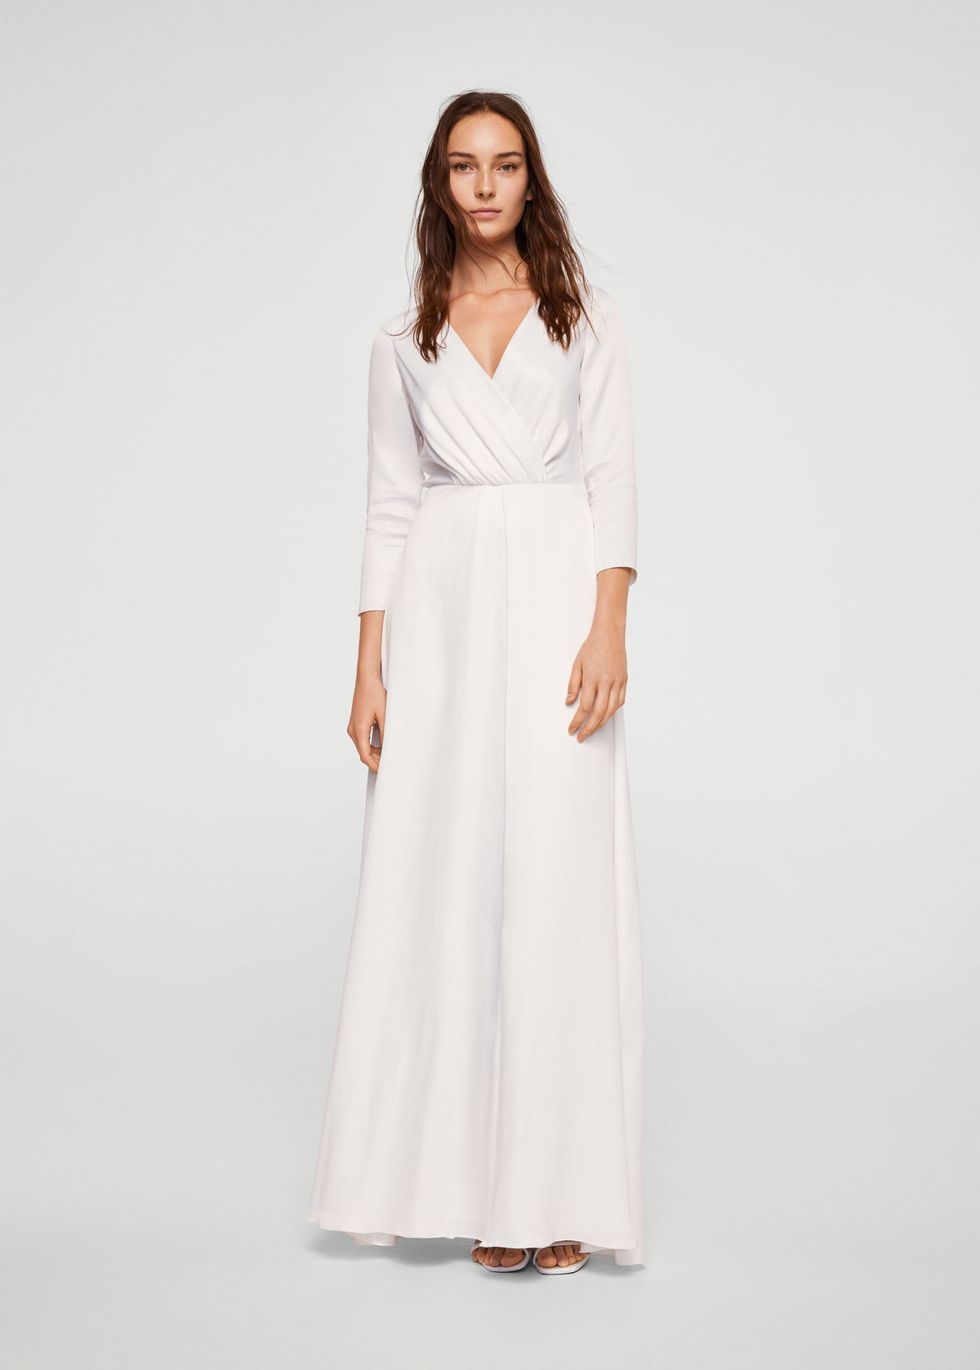 Clothing, White, Dress, Gown, Day dress, Sleeve, Neck, Photo shoot, Fashion model, Formal wear, 